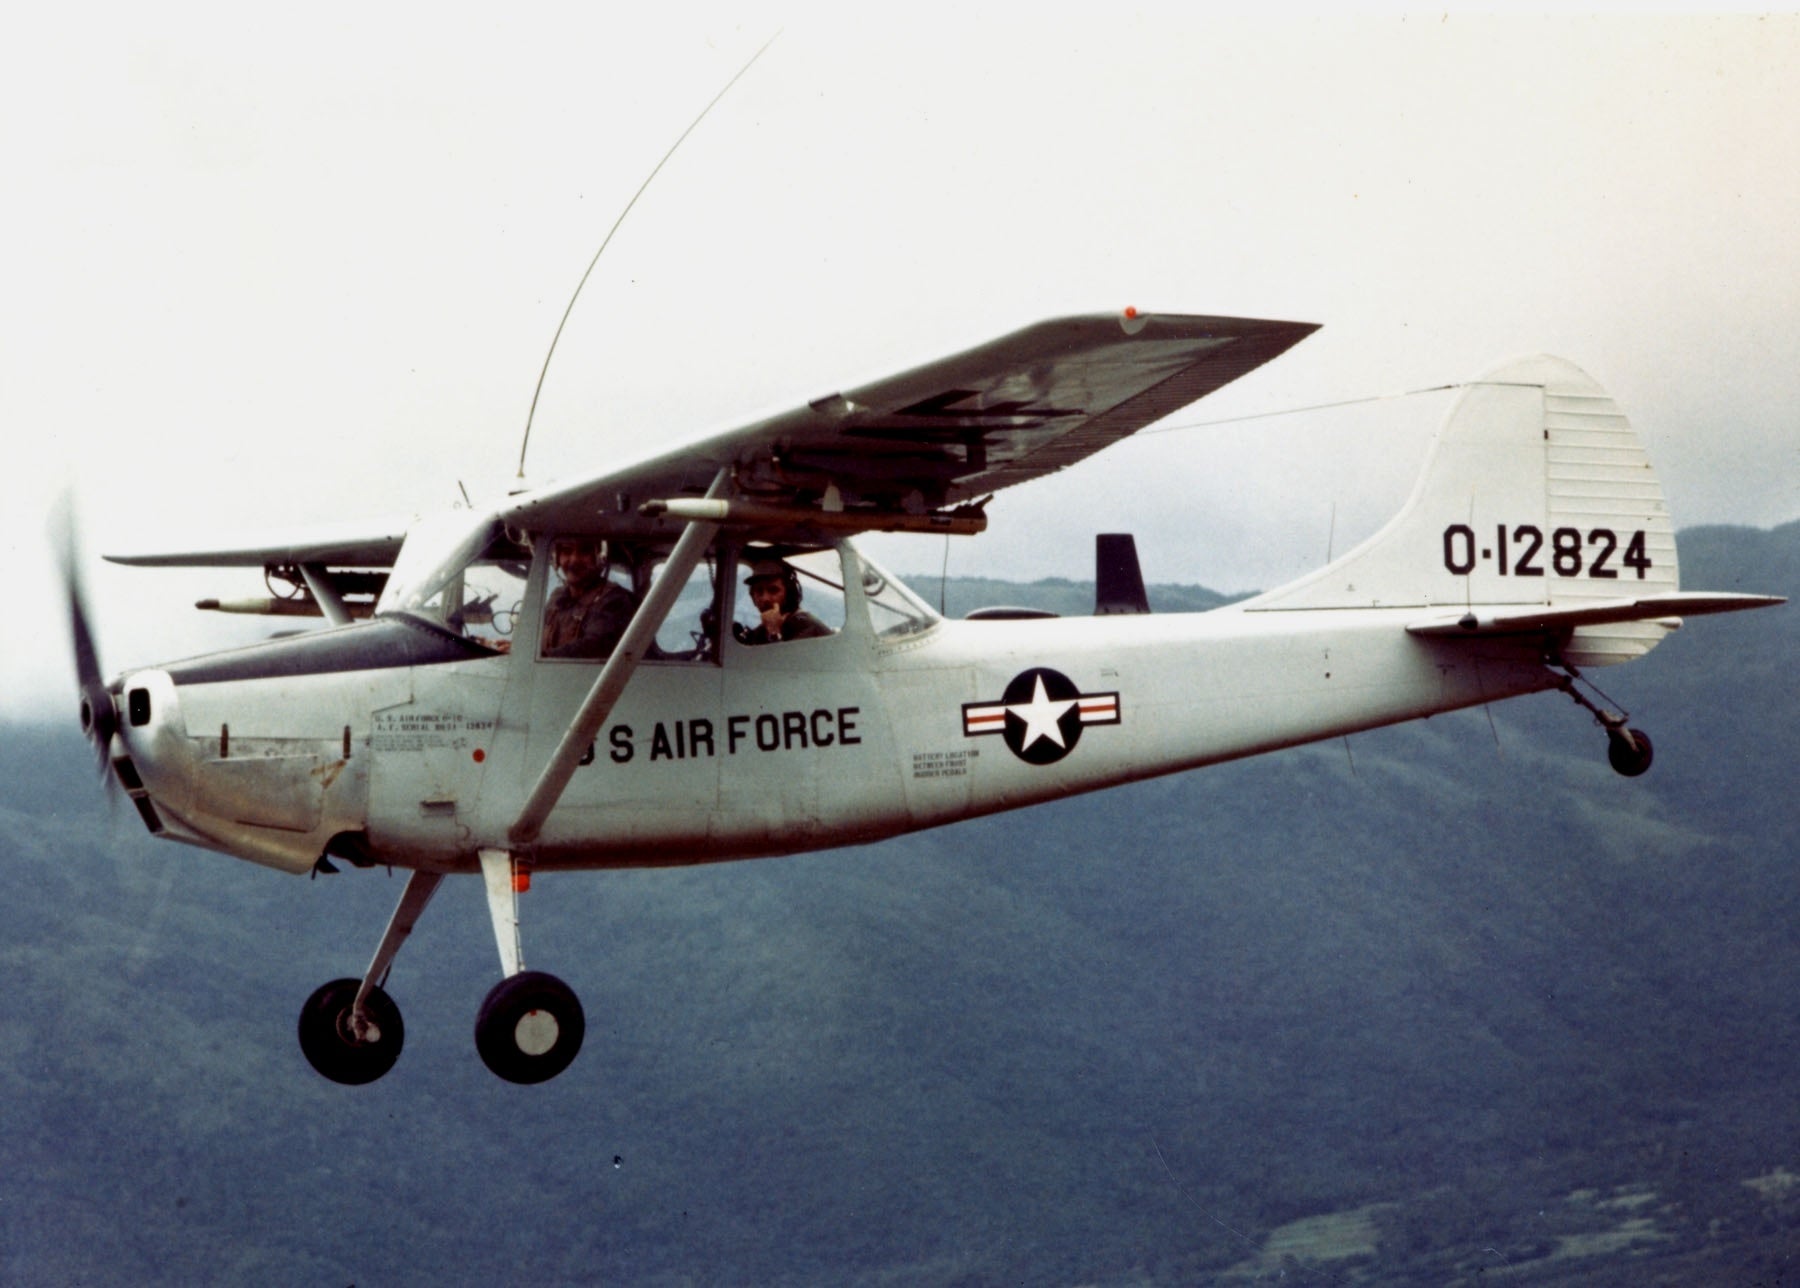 How a plain old Cessna became a military legend